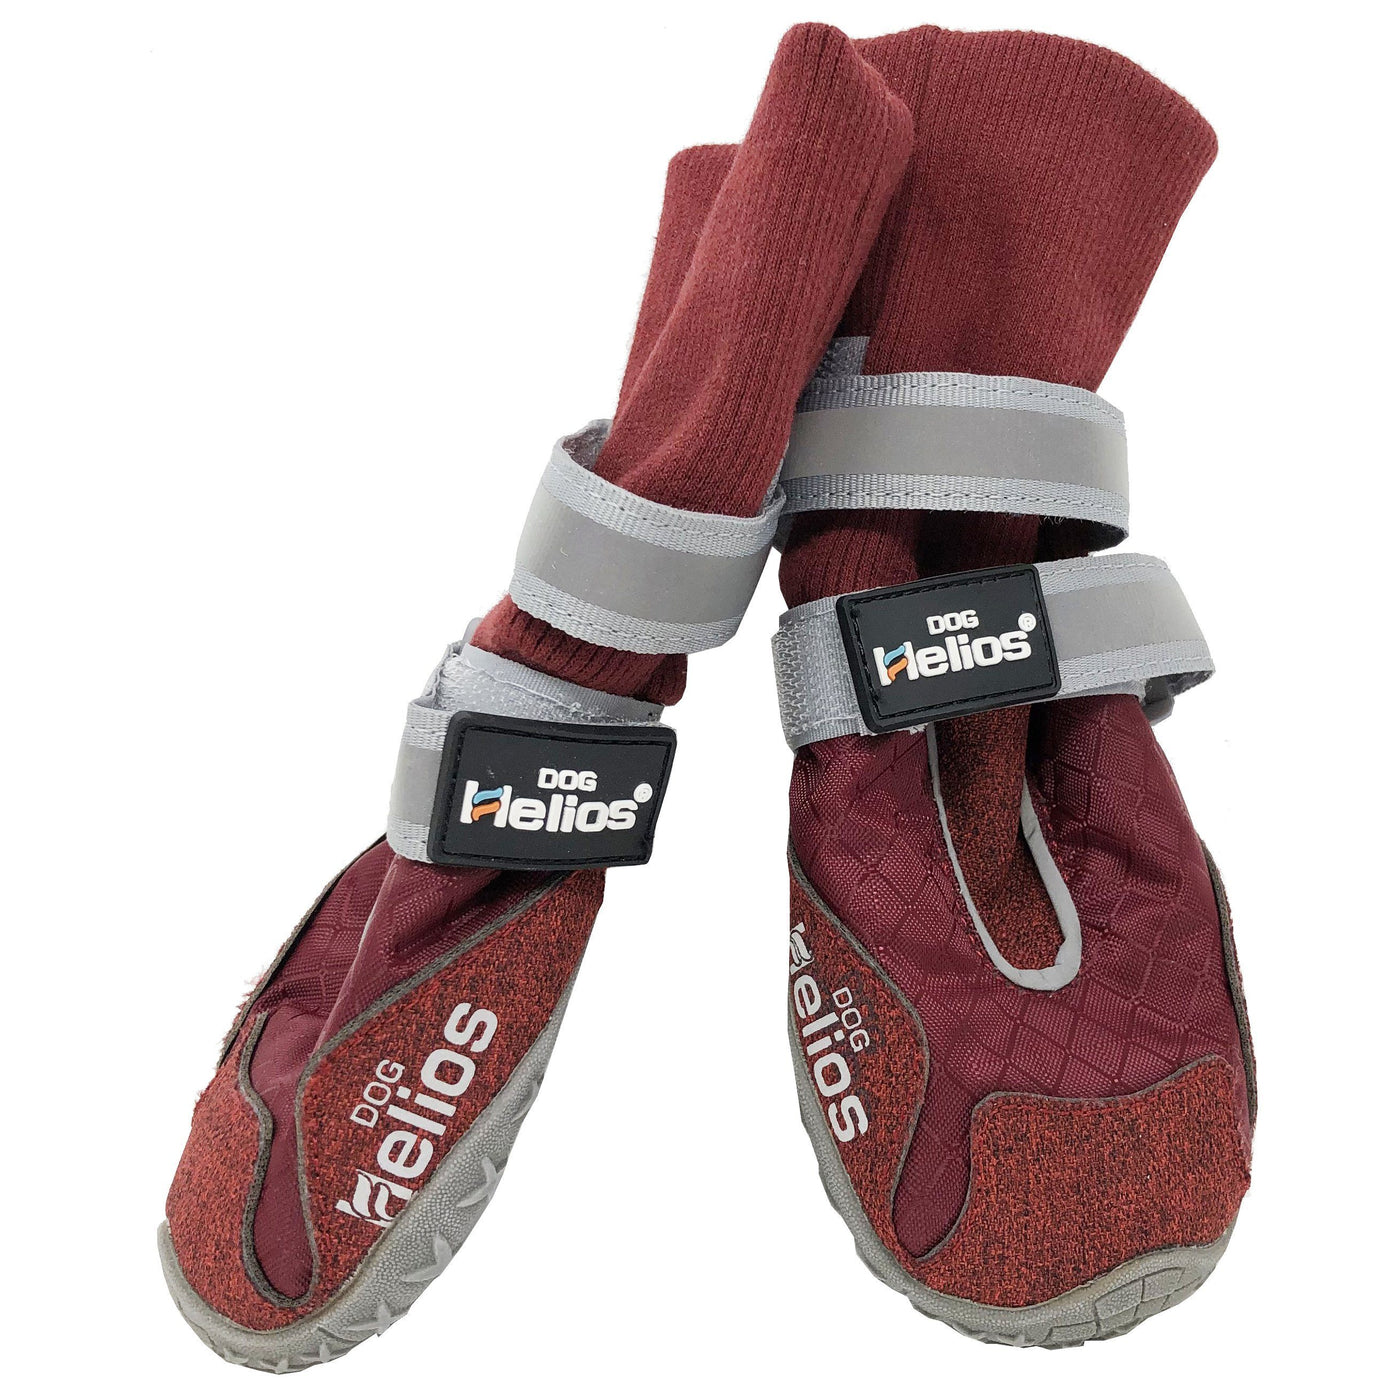 Outdoor Dog Boots, Dog Helios Boots